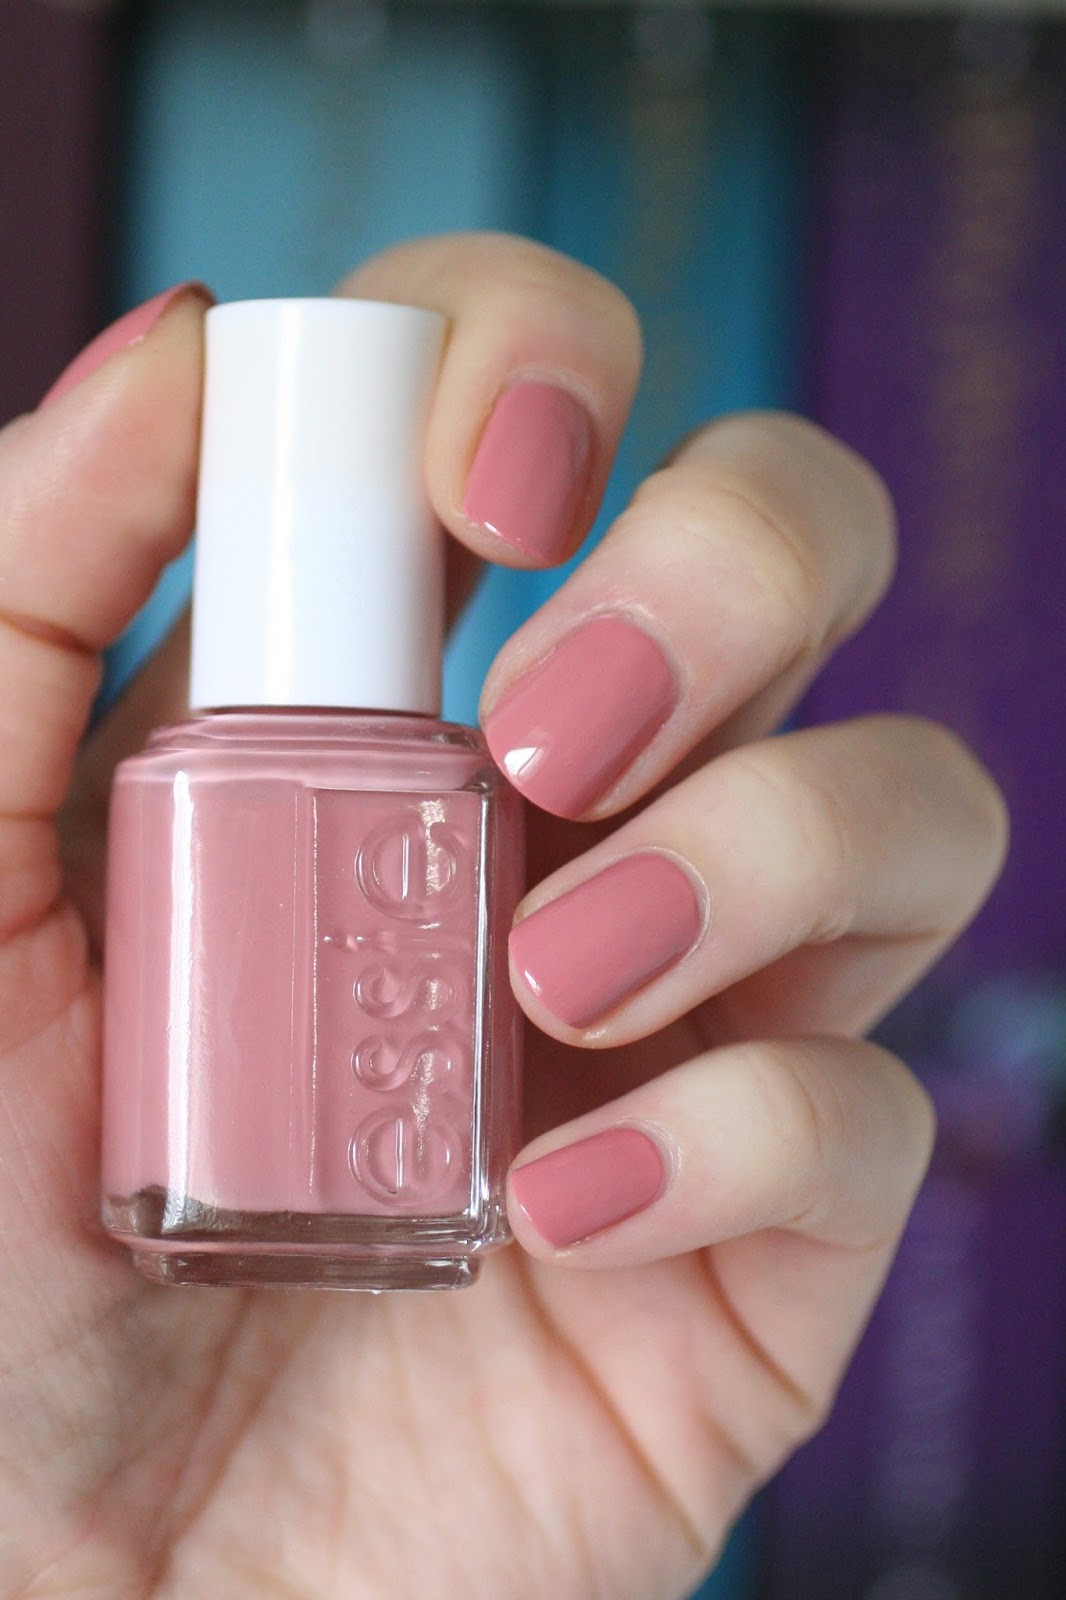 Best Essie Nail Colors
 The Best Selling Essie Polishes of All Time with Swatches